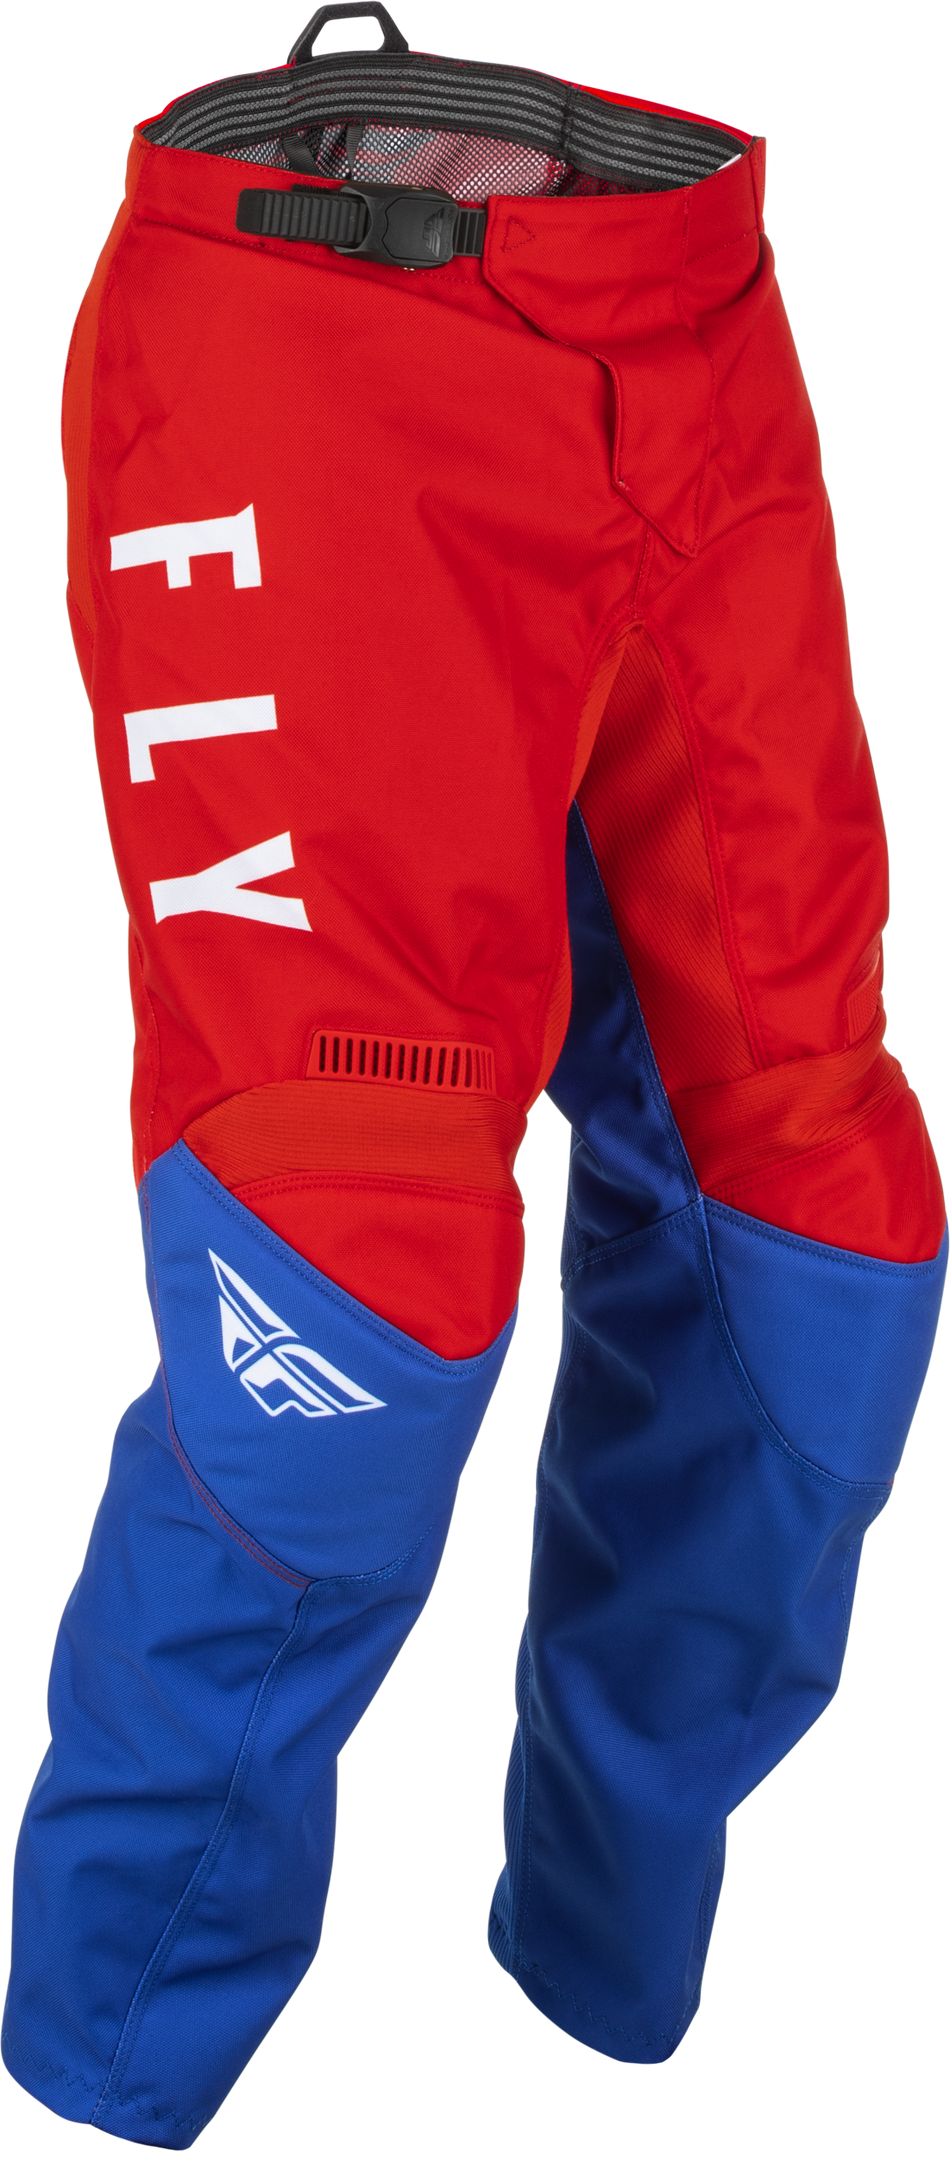 FLY RACING Youth F-16 Pants Red/White/Blue Sz 26 375-93426